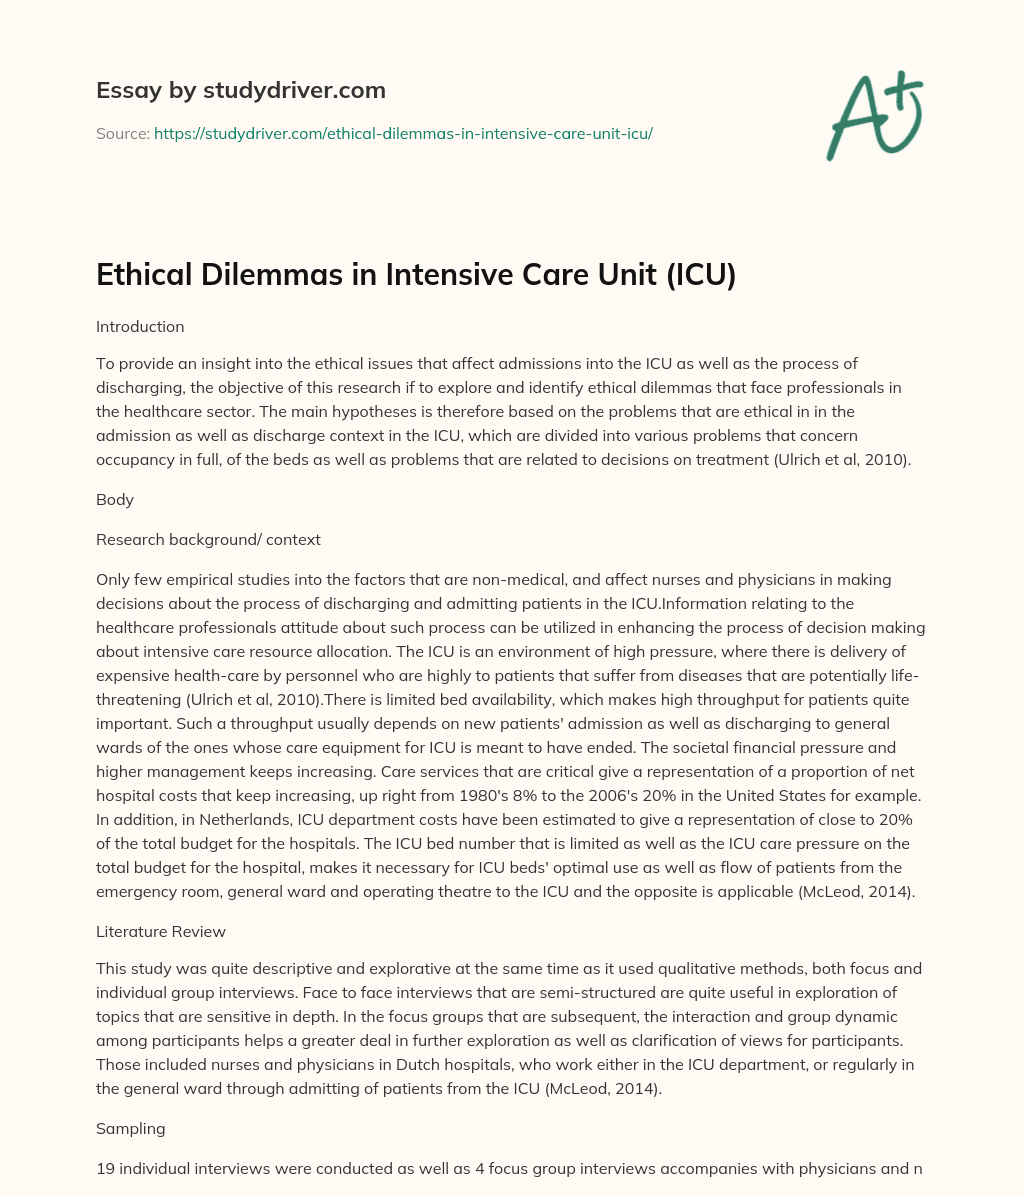 Ethical Dilemmas in Intensive Care Unit (ICU) essay